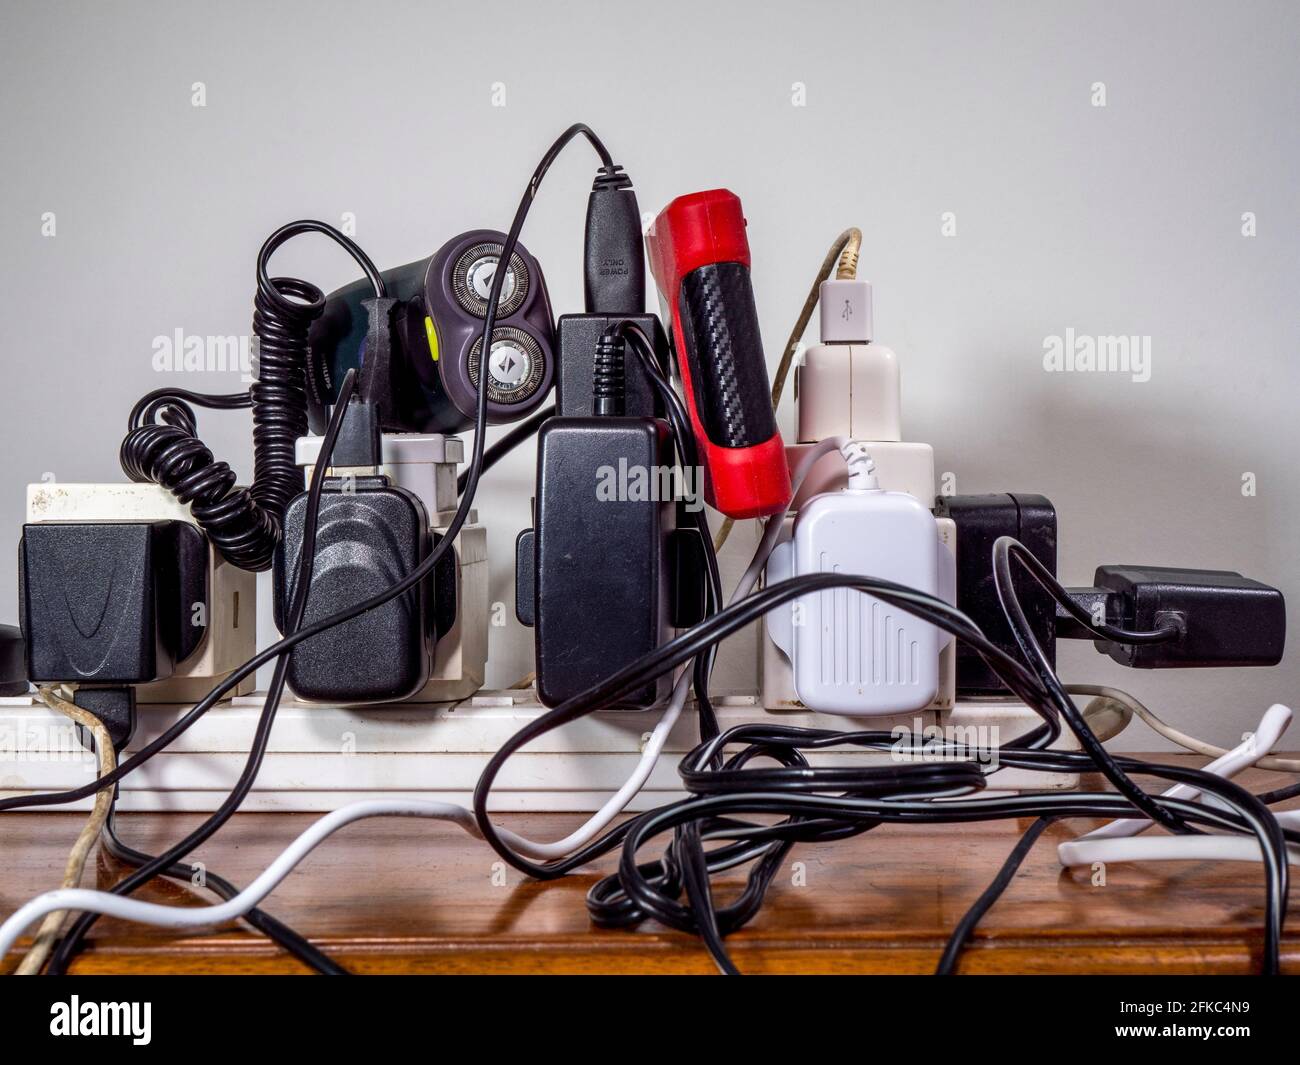 Unsafe, overloaded, UK 240 volt electricity supply, with a mess of plugs, sockets, extensions, wires and cables, all plugged into an extension board. Stock Photo